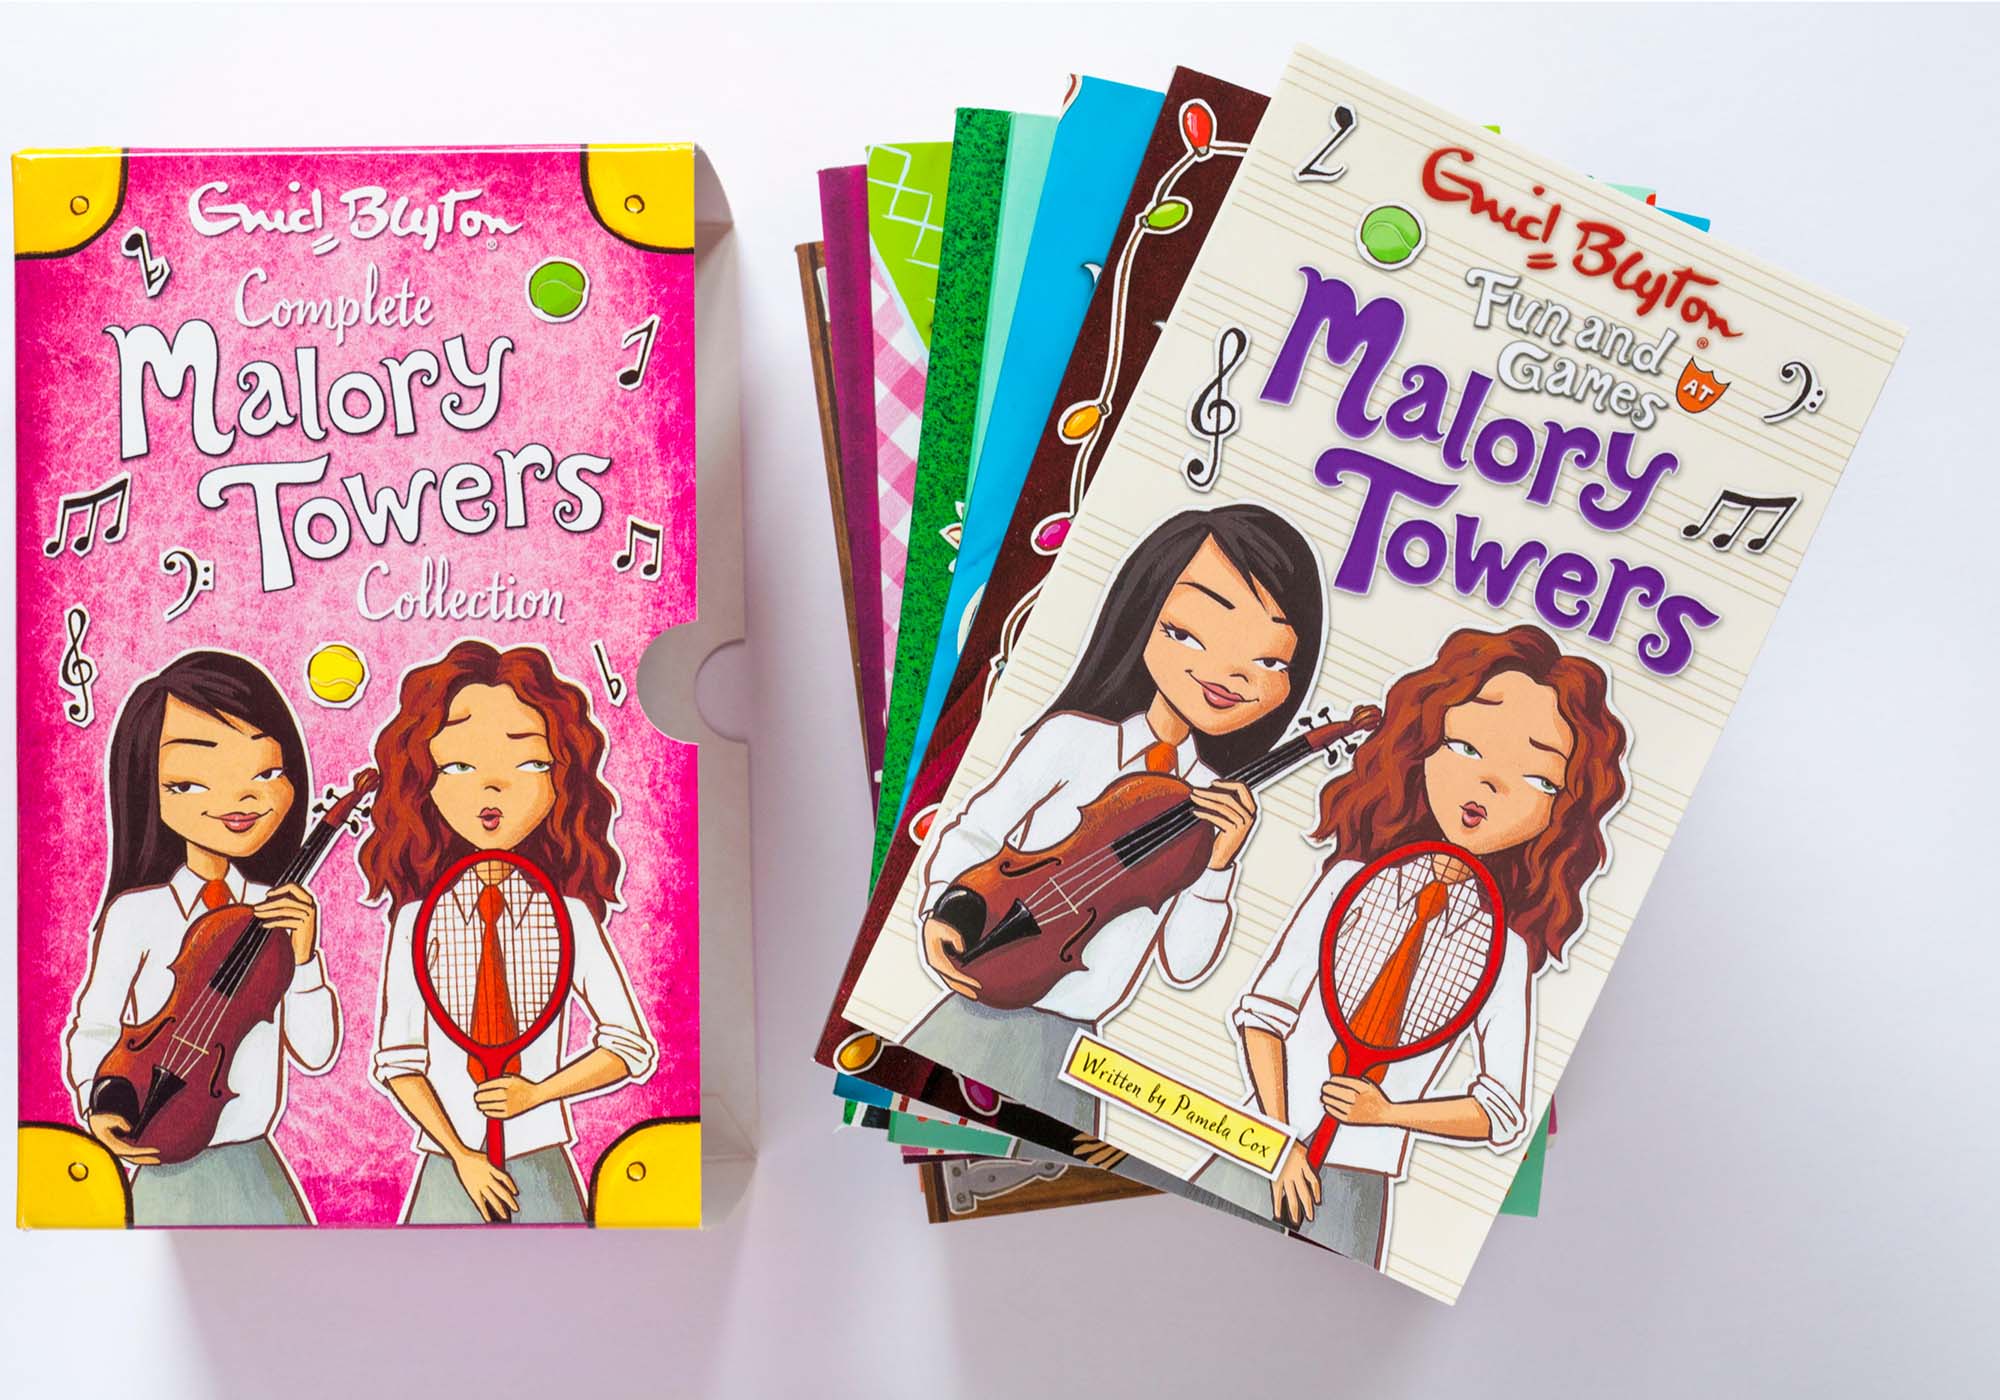 Enid Blyton classic Malory Towers heading to BBC – but it has a twist!